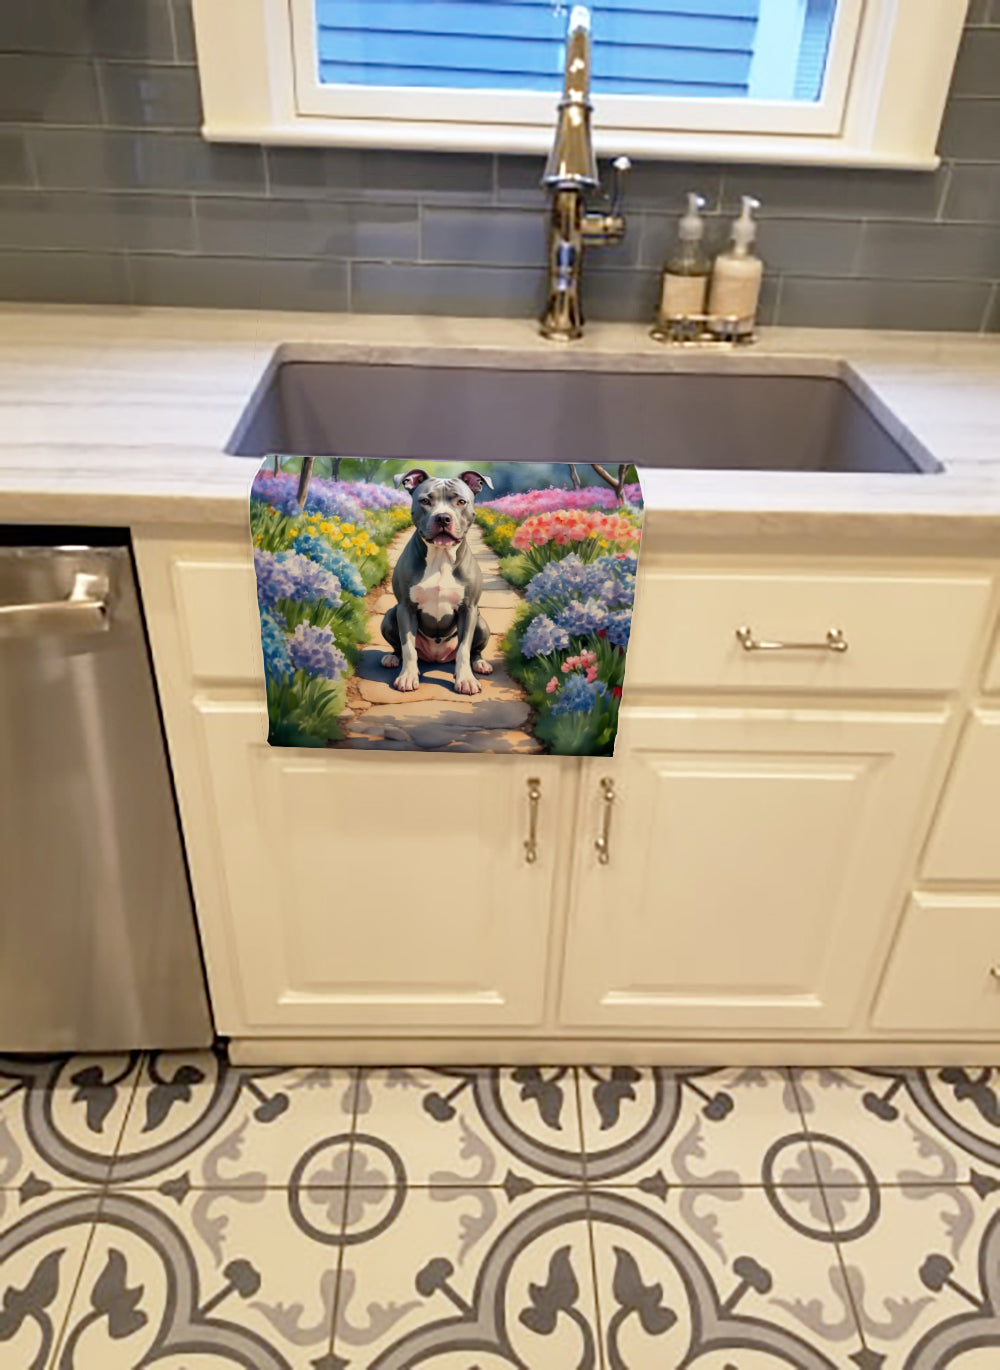 Buy this Pit Bull Terrier Spring Path Kitchen Towel